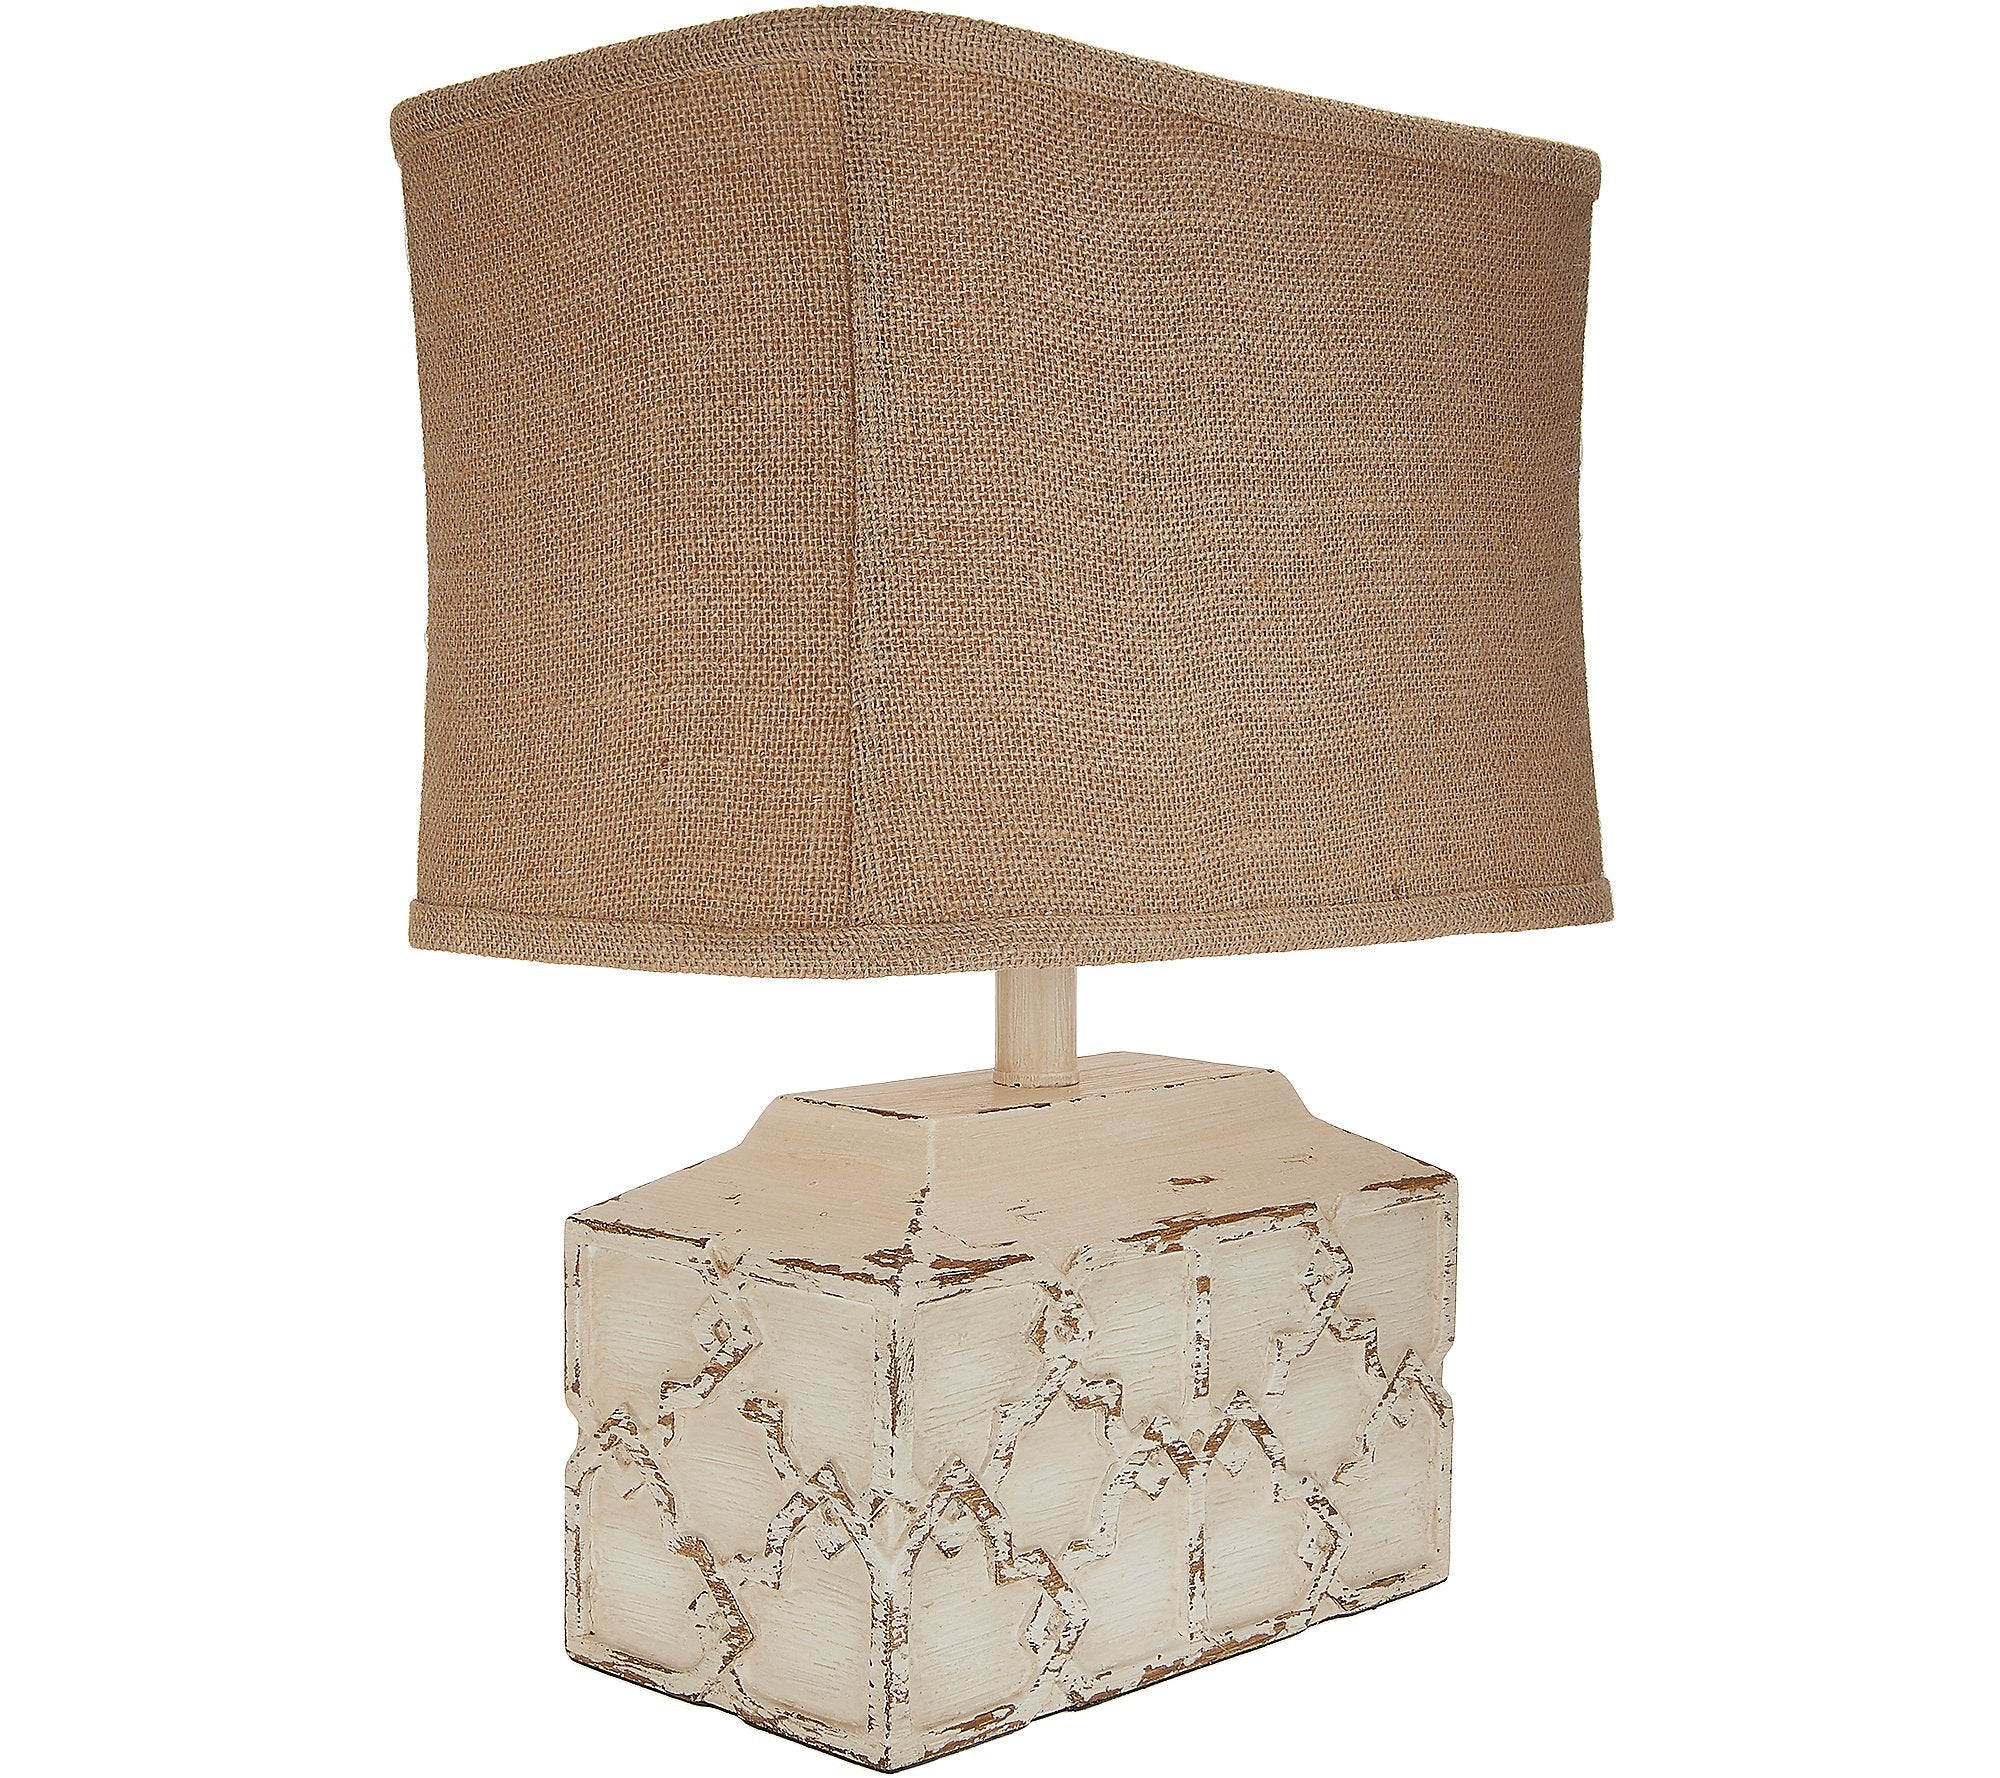 Treasure Box Decorative Lamp with Shade by Valerie